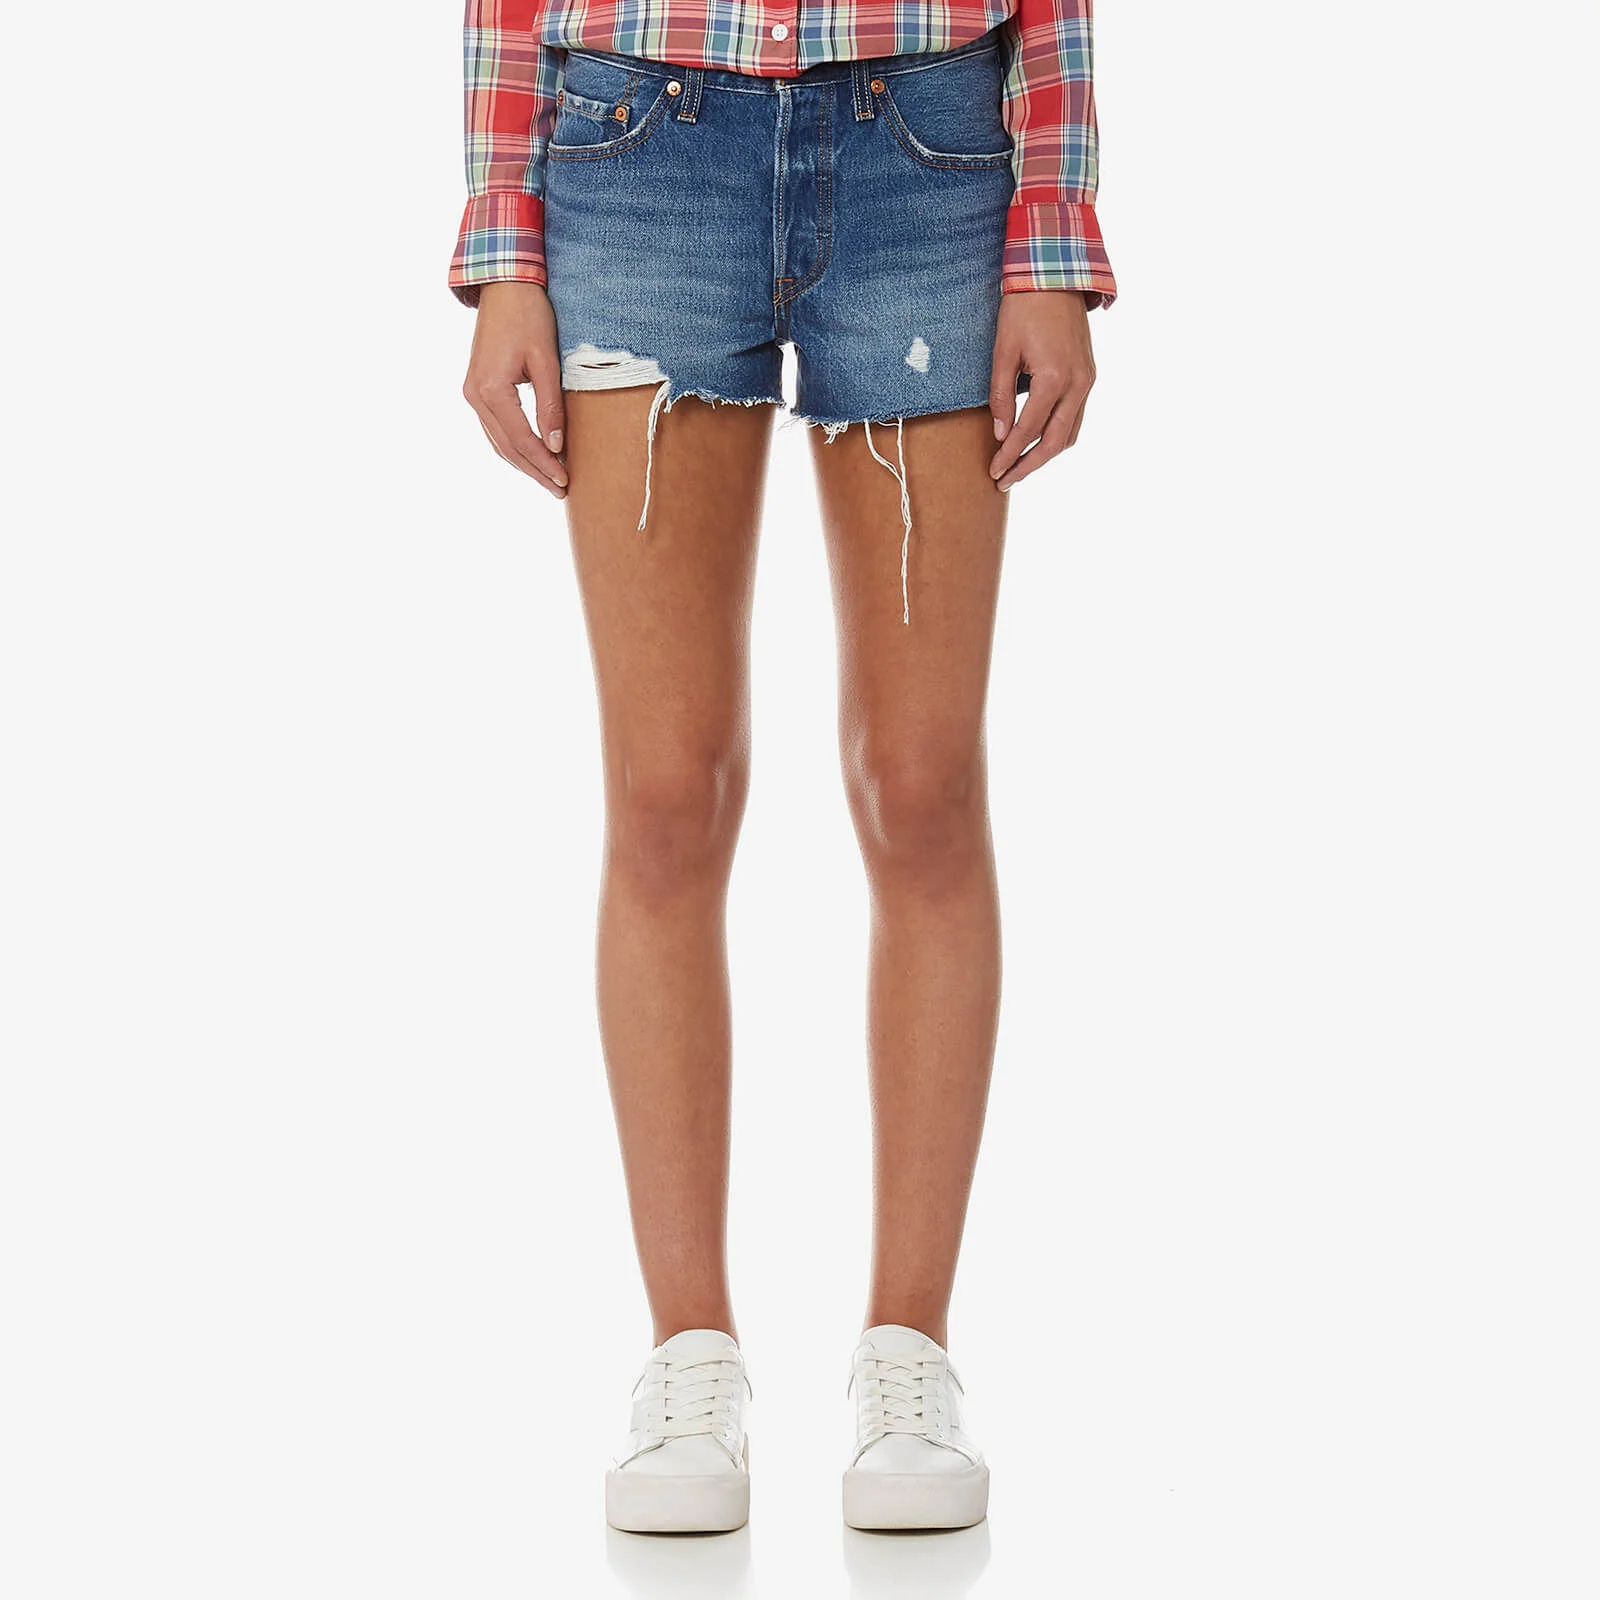 Levi's Women's 501 Shorts - Back To Your Heart Image 1